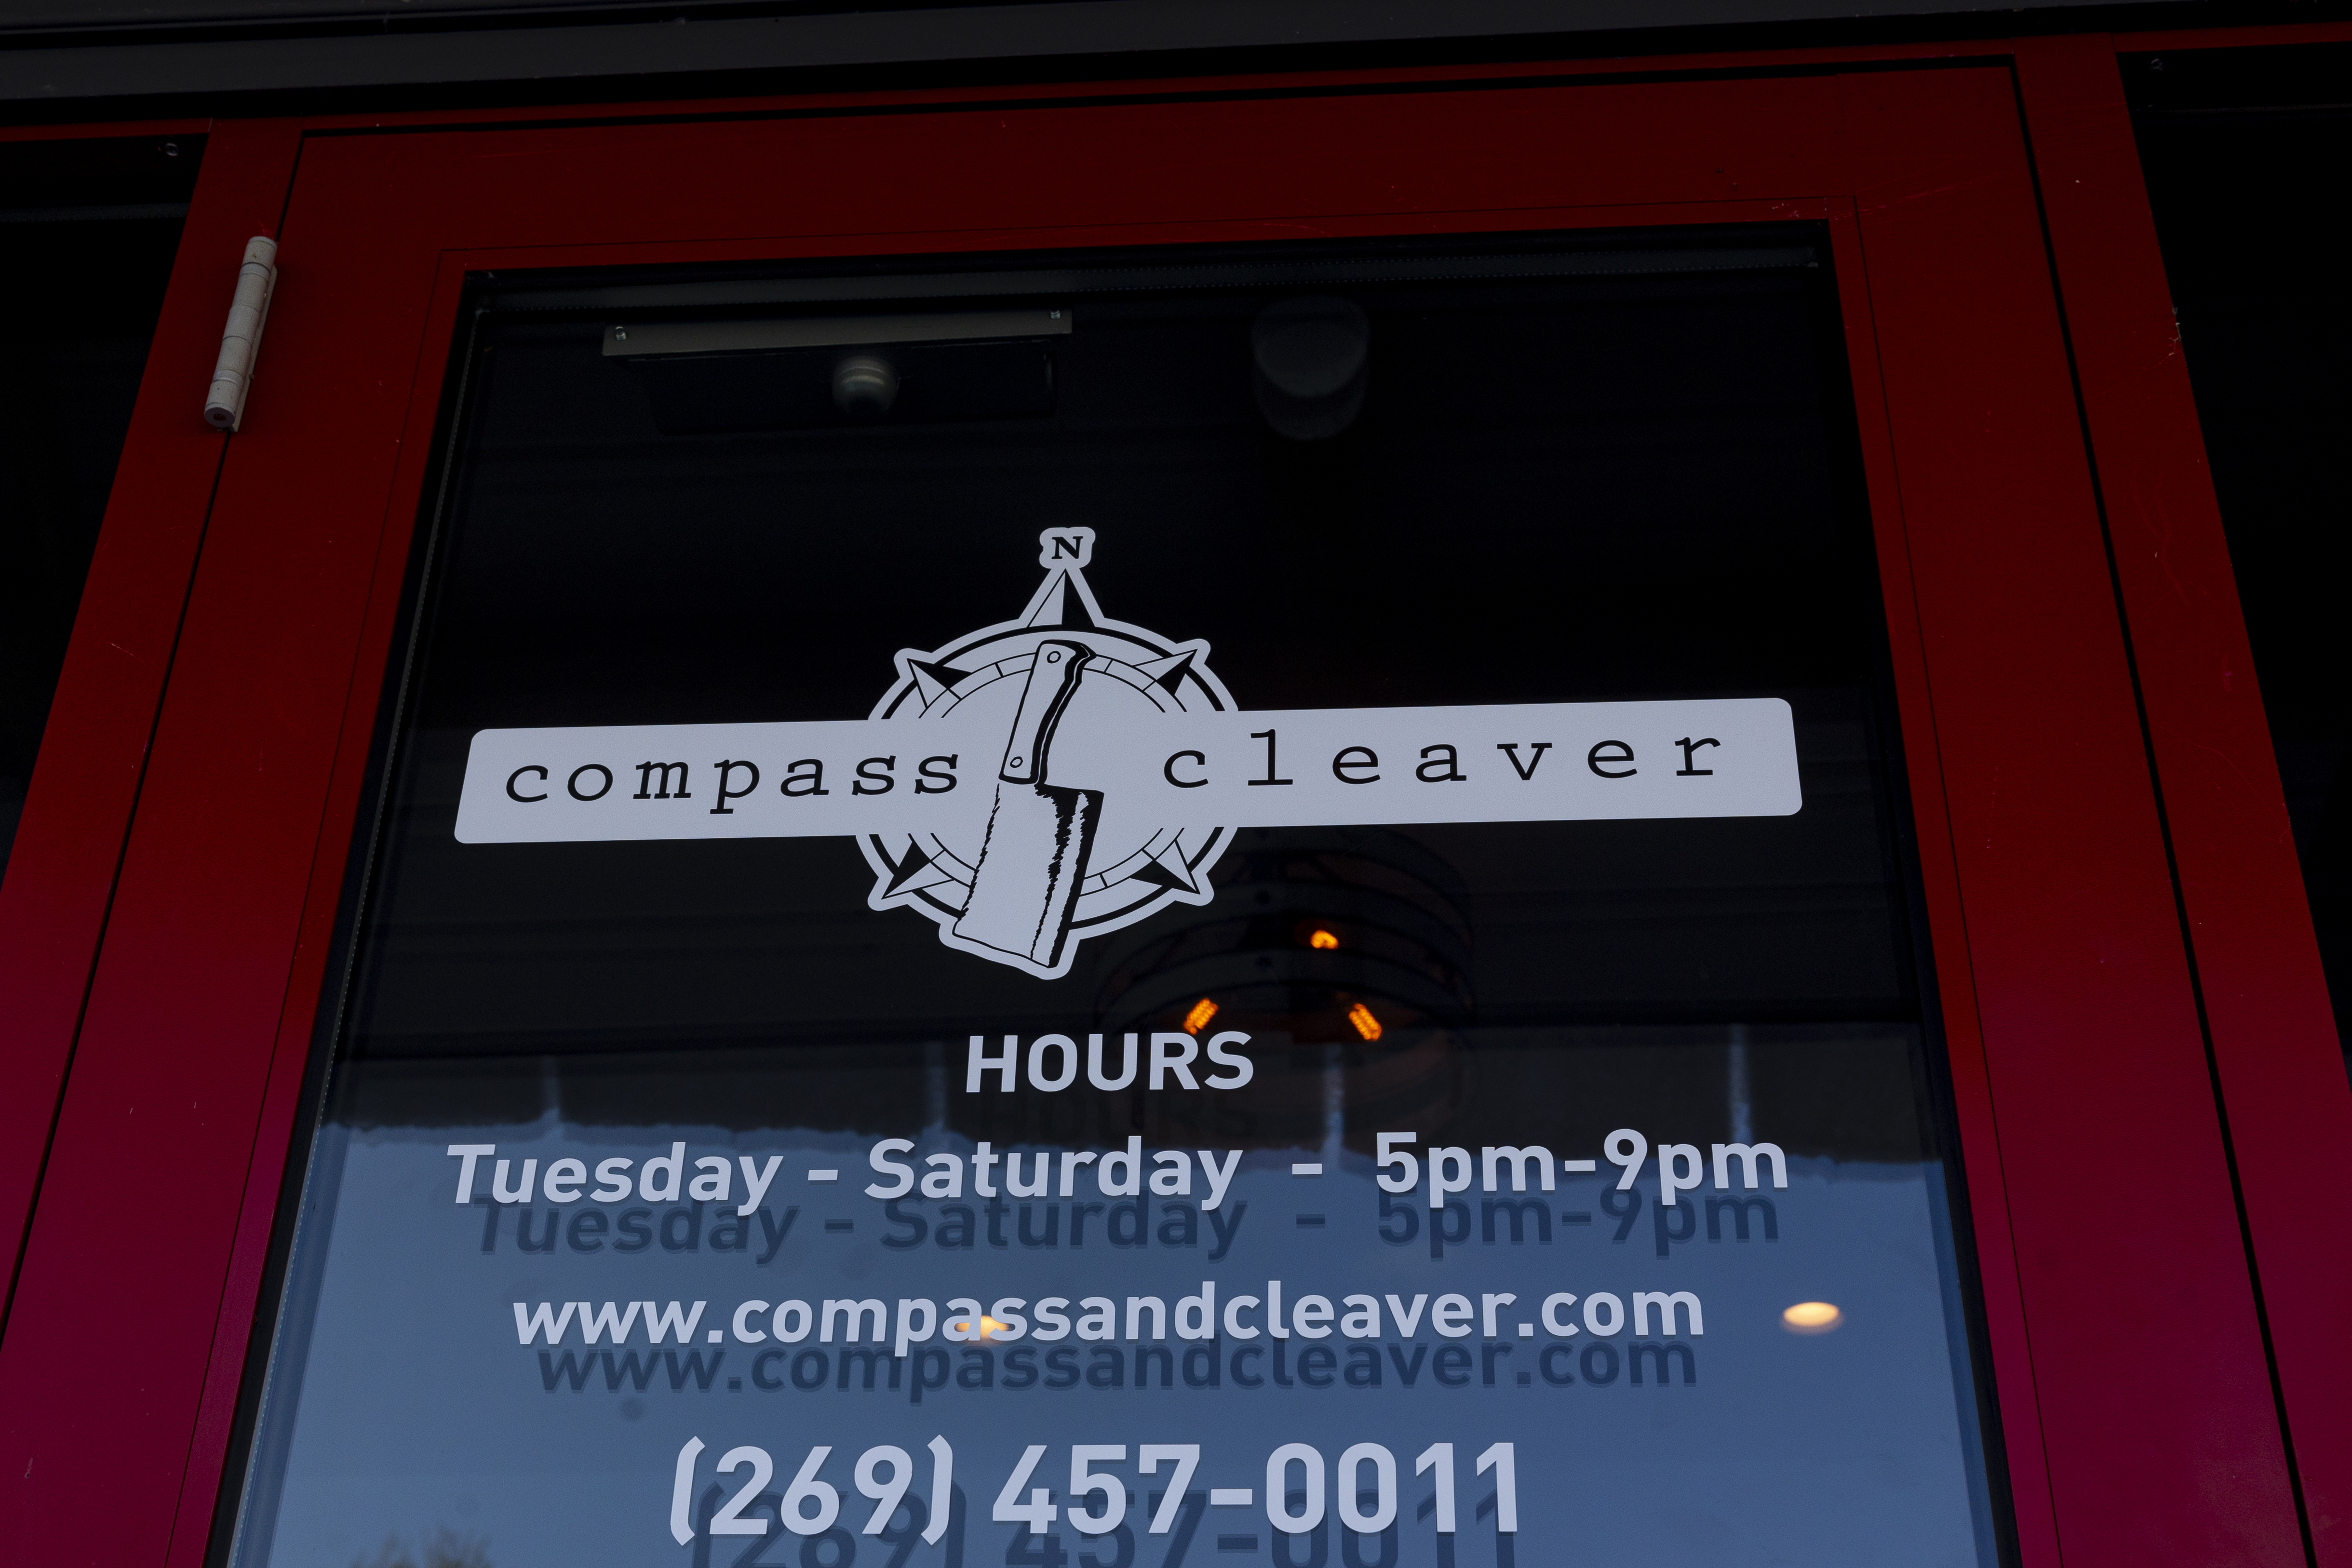 Compass and Cleaver— a collaboration from the owners of South Kitchen and Kitchen House at 12454 E D Ave. in Richland, Michigan.